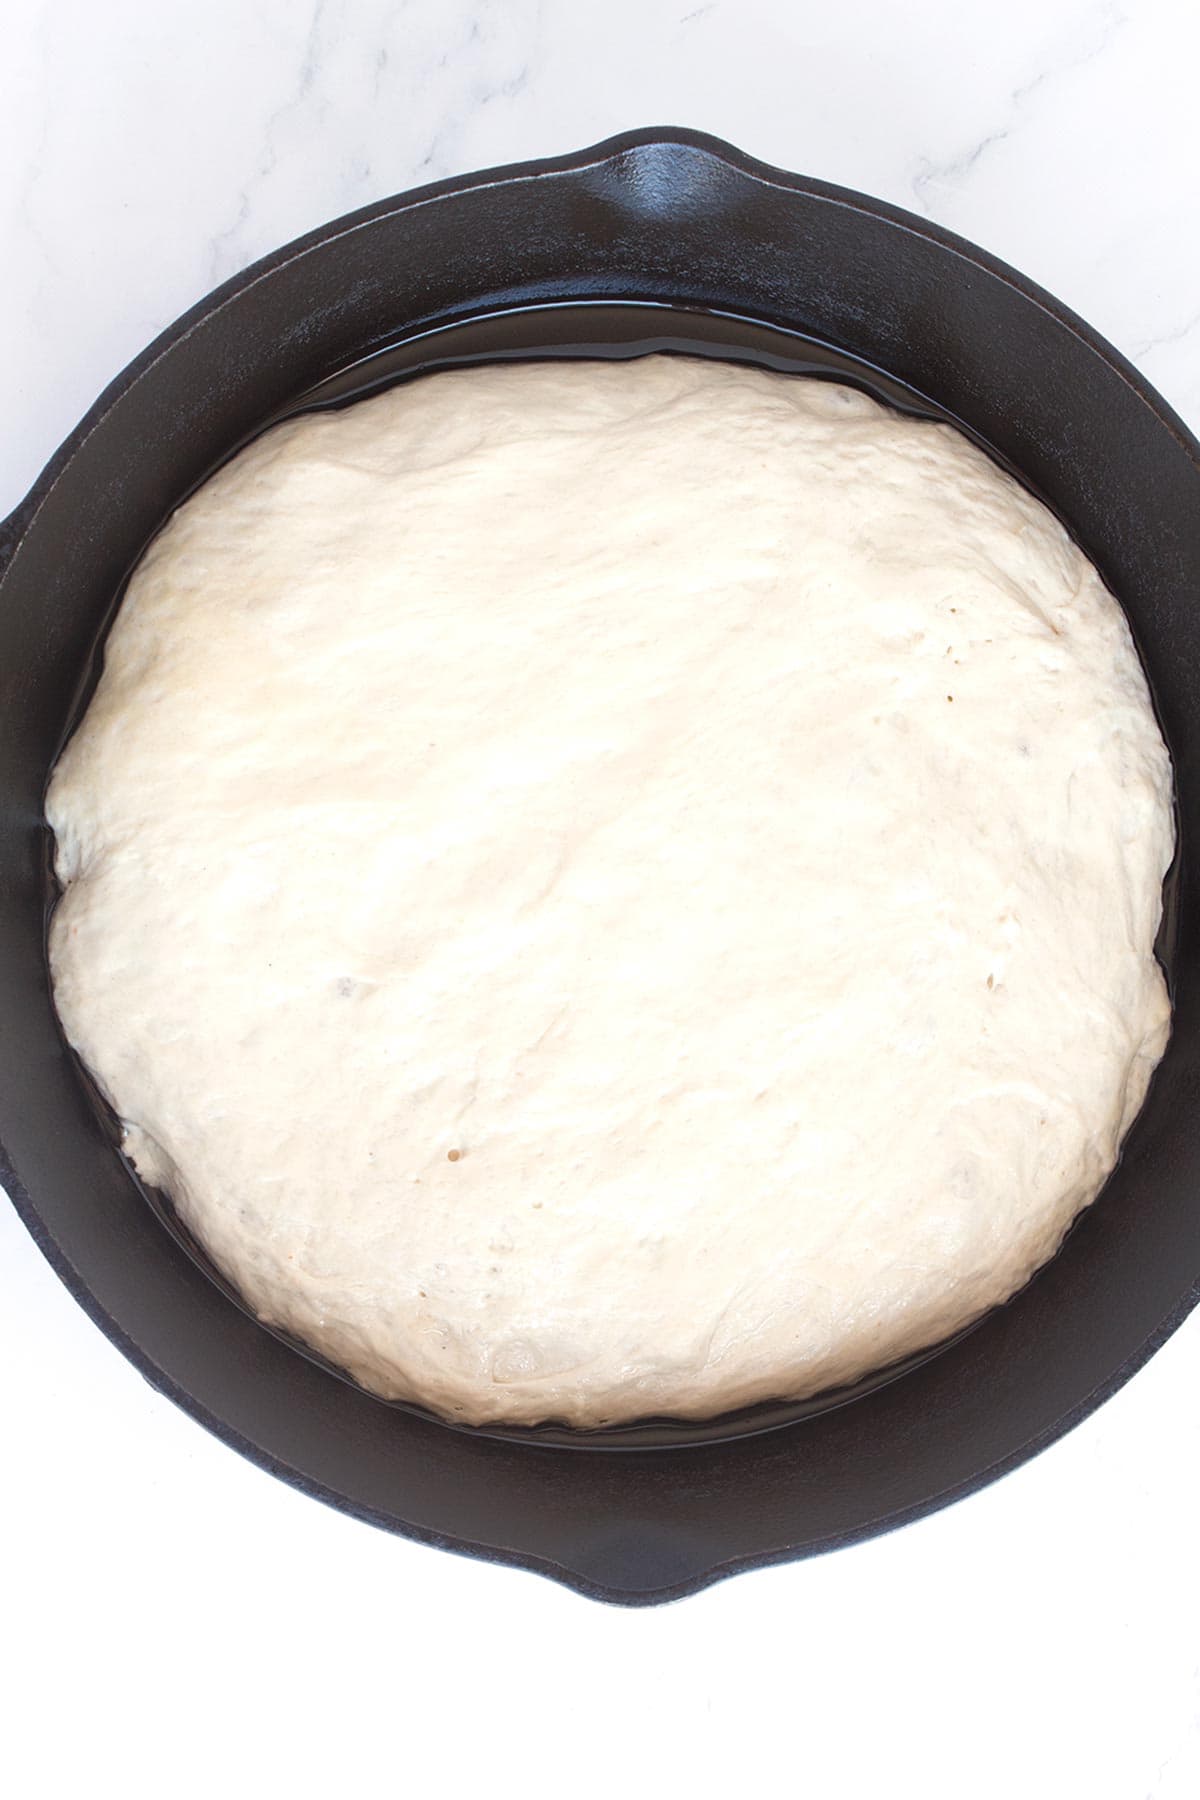 Second step in dough rising in pan before applying pizza toppings.